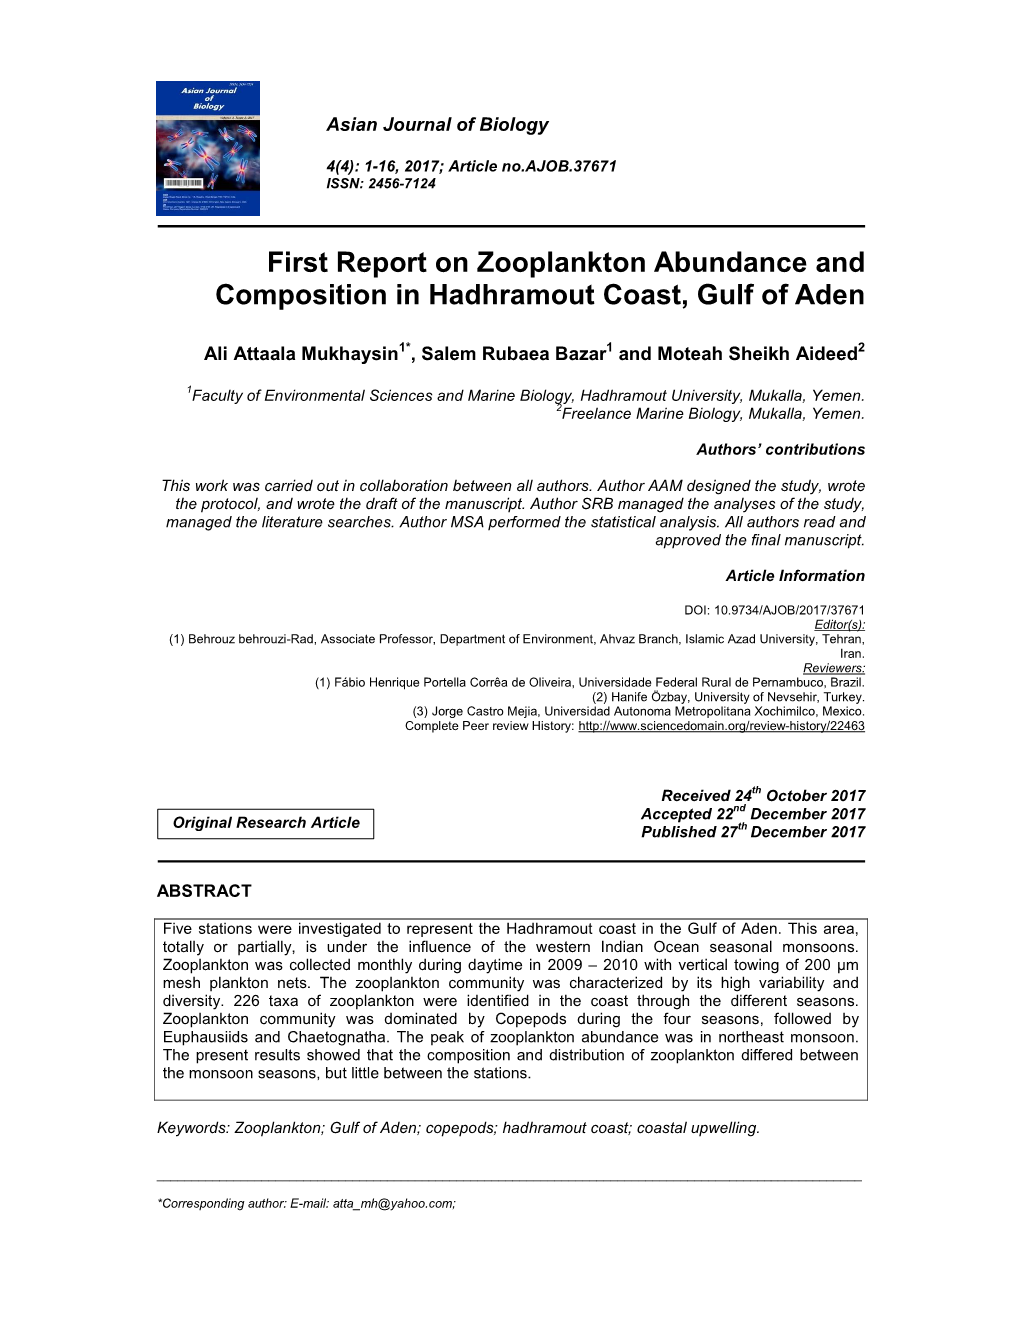 First Report on Zooplankton Abundance and Composition in Hadhramout Coast, Gulf of Aden